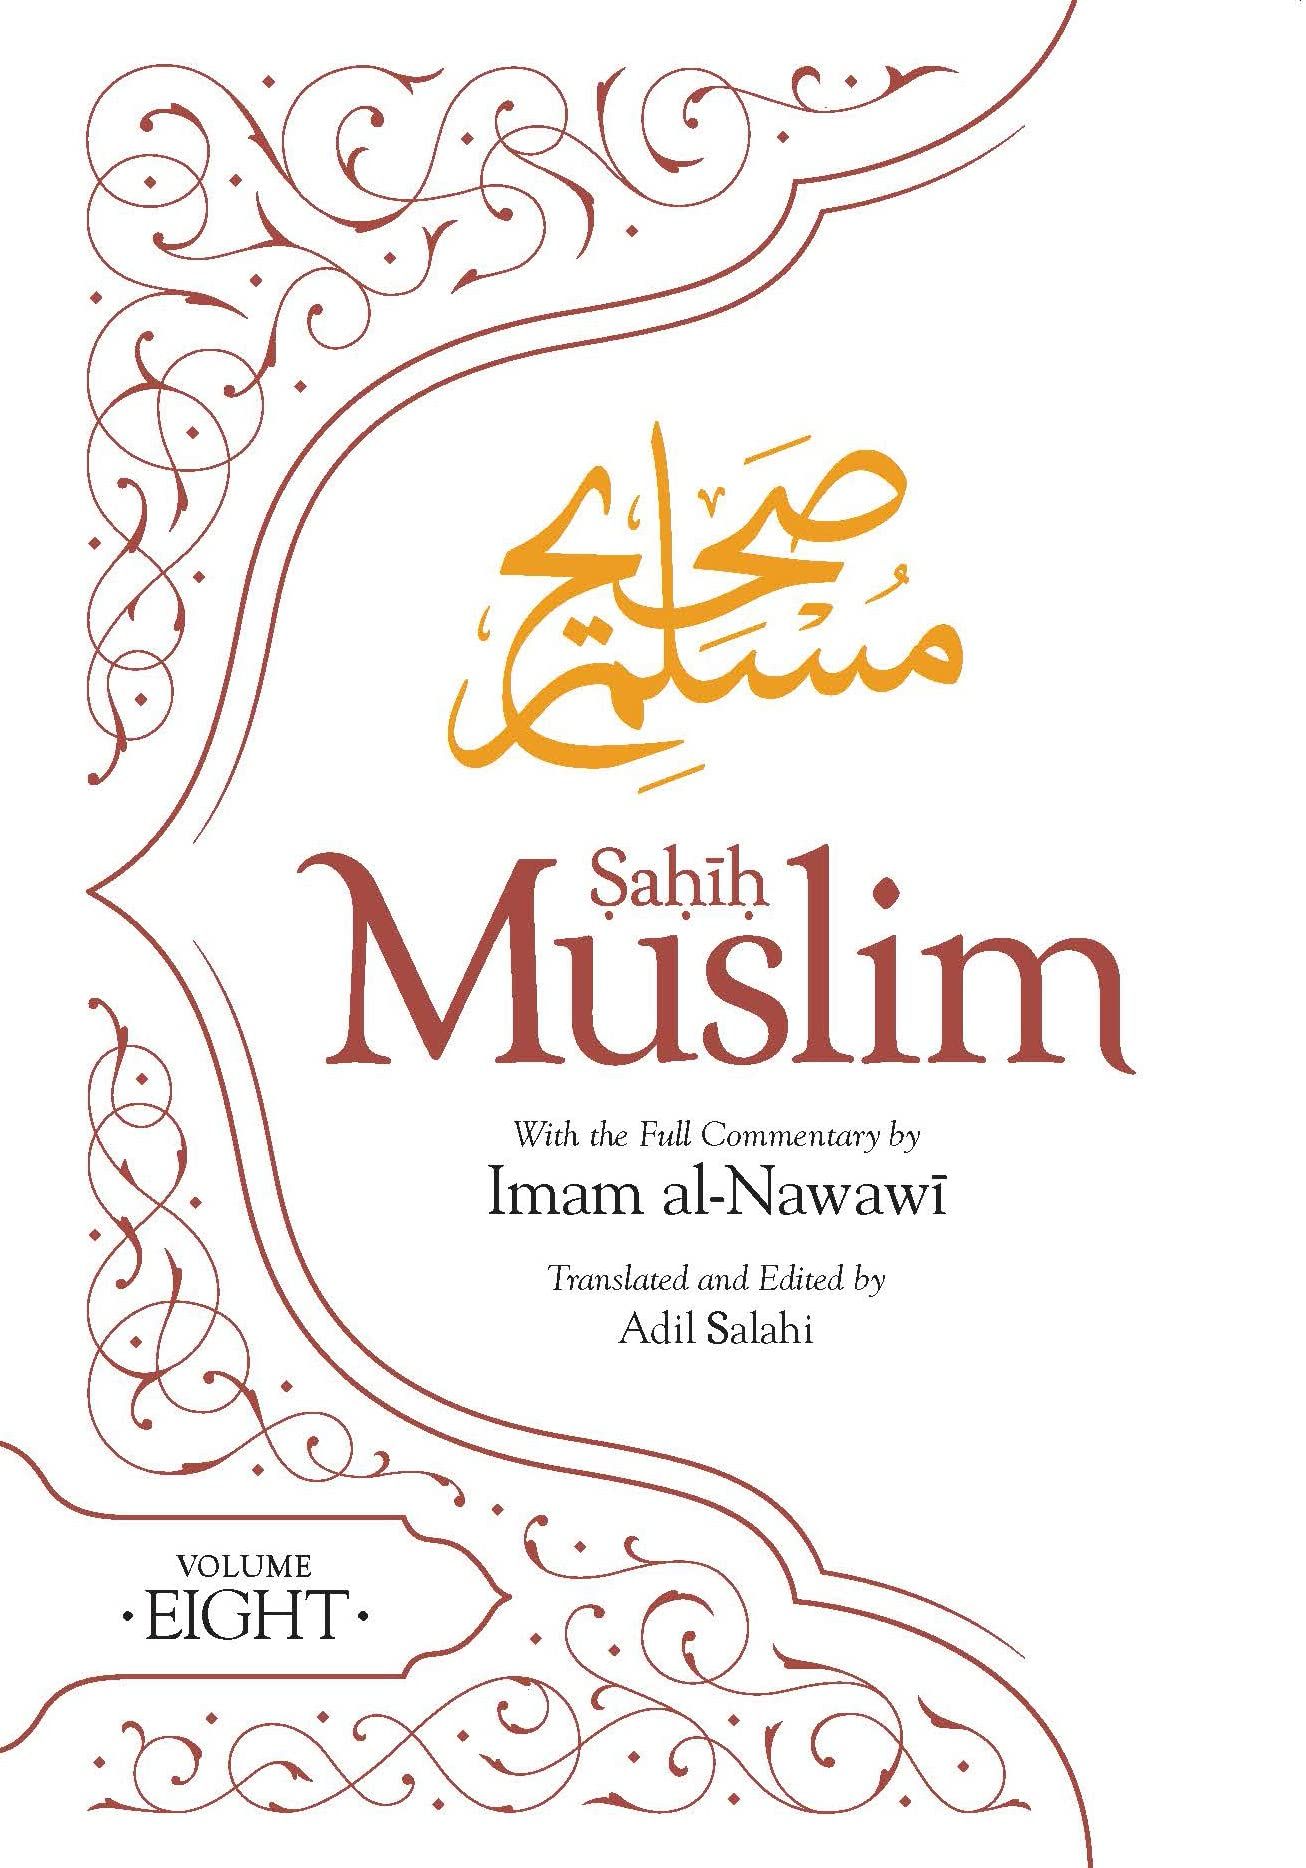 Sahih Muslim With Full Commentary By Imam Al-Nawawi: Volume 8